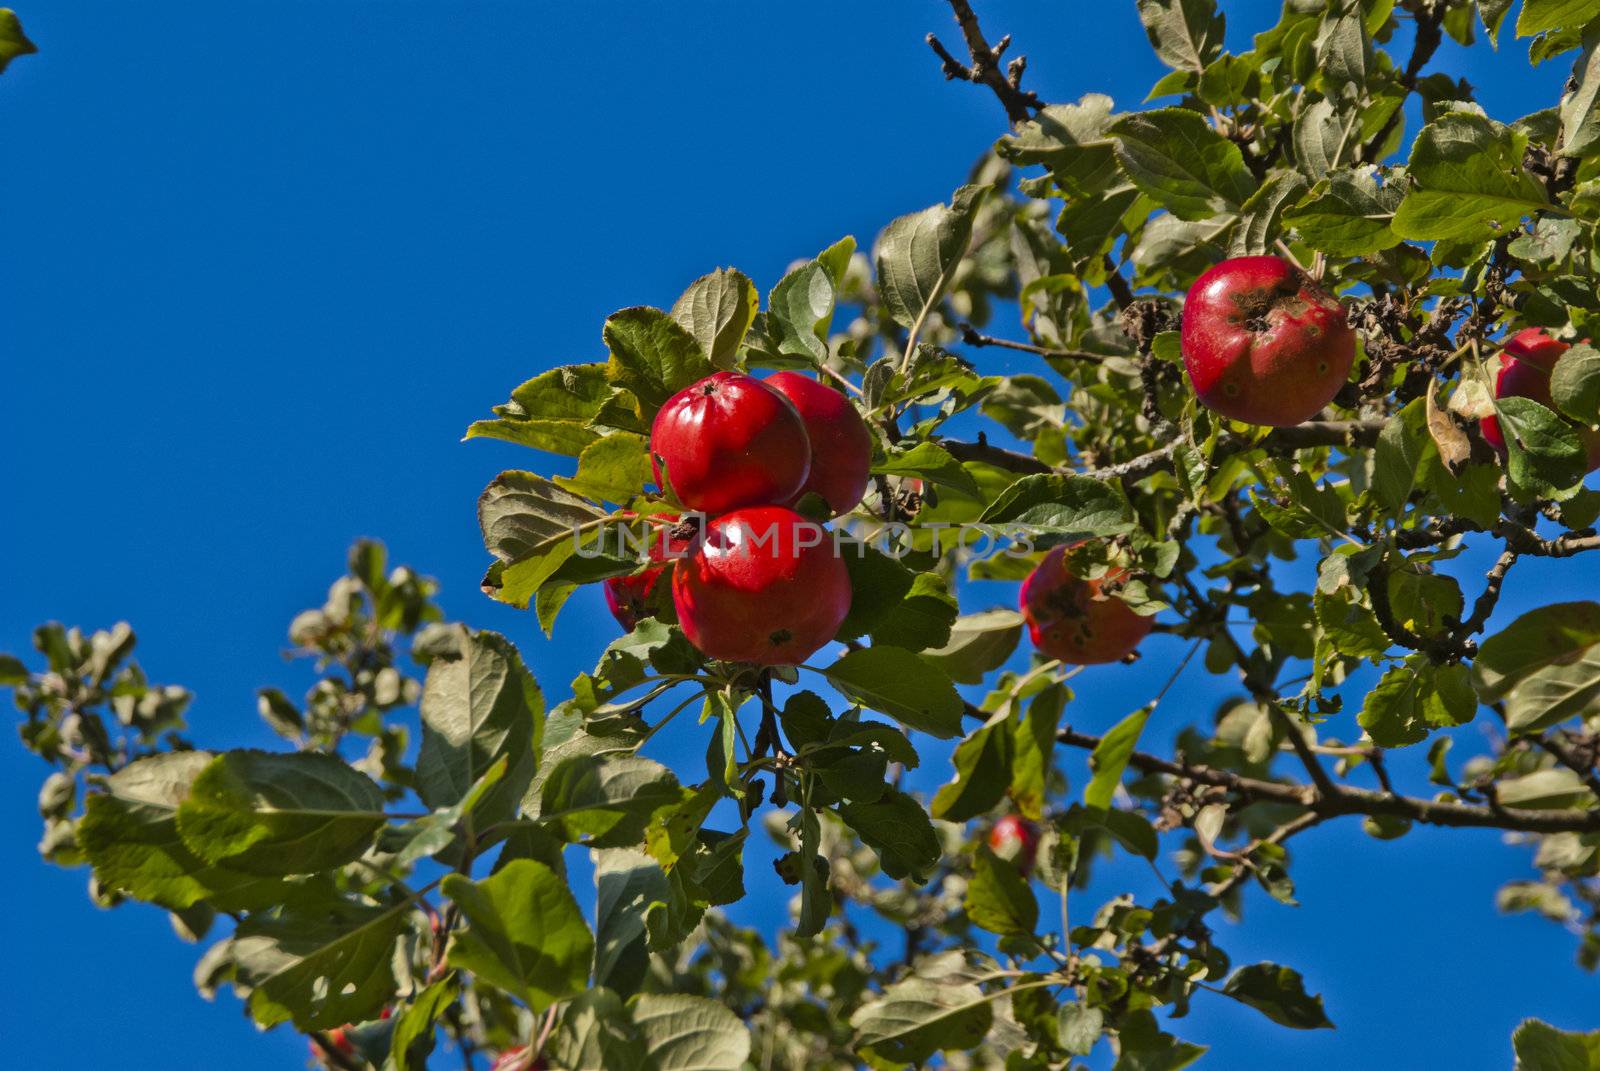 photo is shot in the garden of red mansion in halden and shows apple tree with red apples